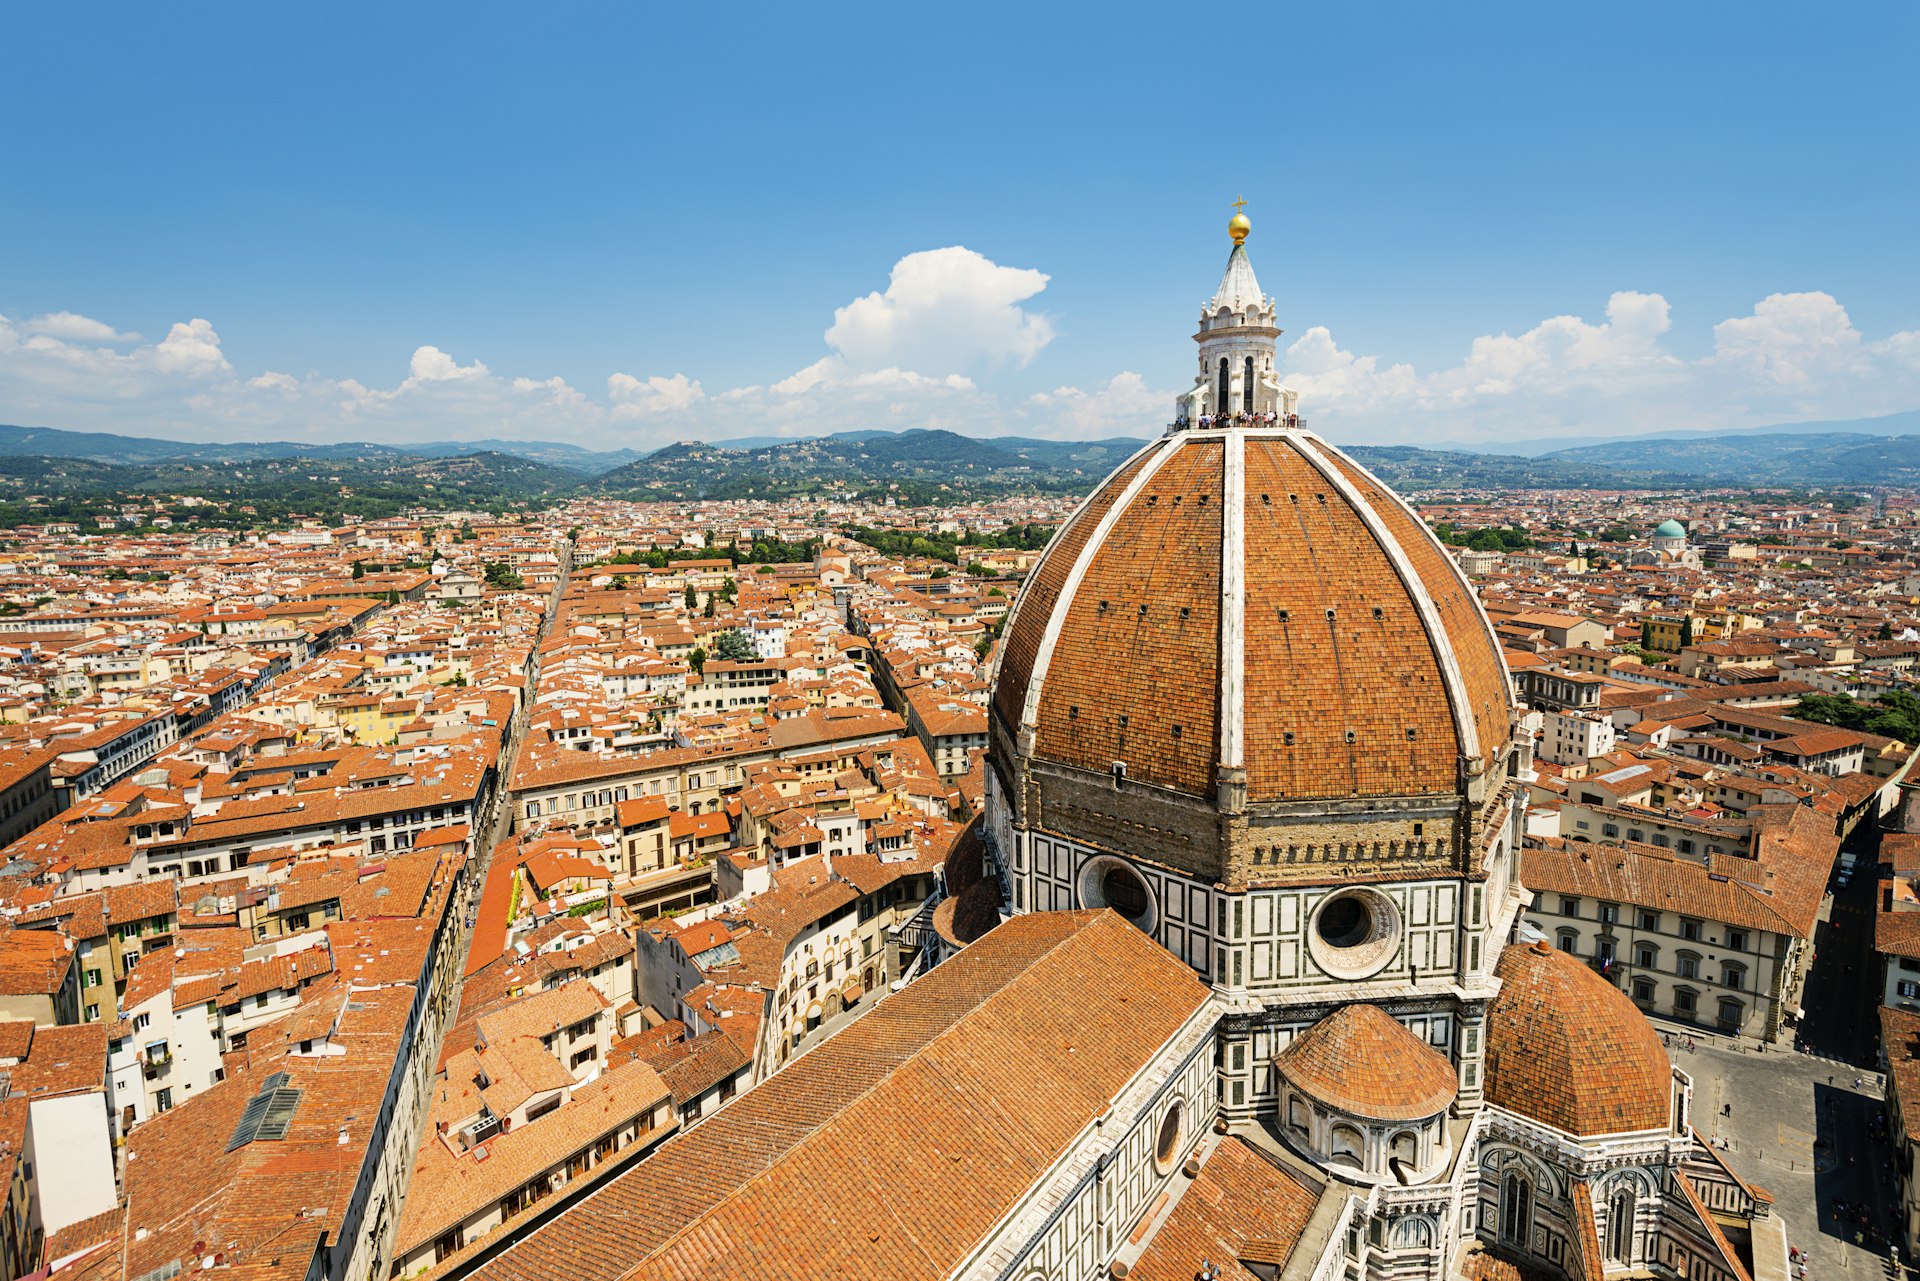 An aerial shot of the famous red tiled dome of Florence's Duomo, which stands tall above a sea of other red-tiled roofs